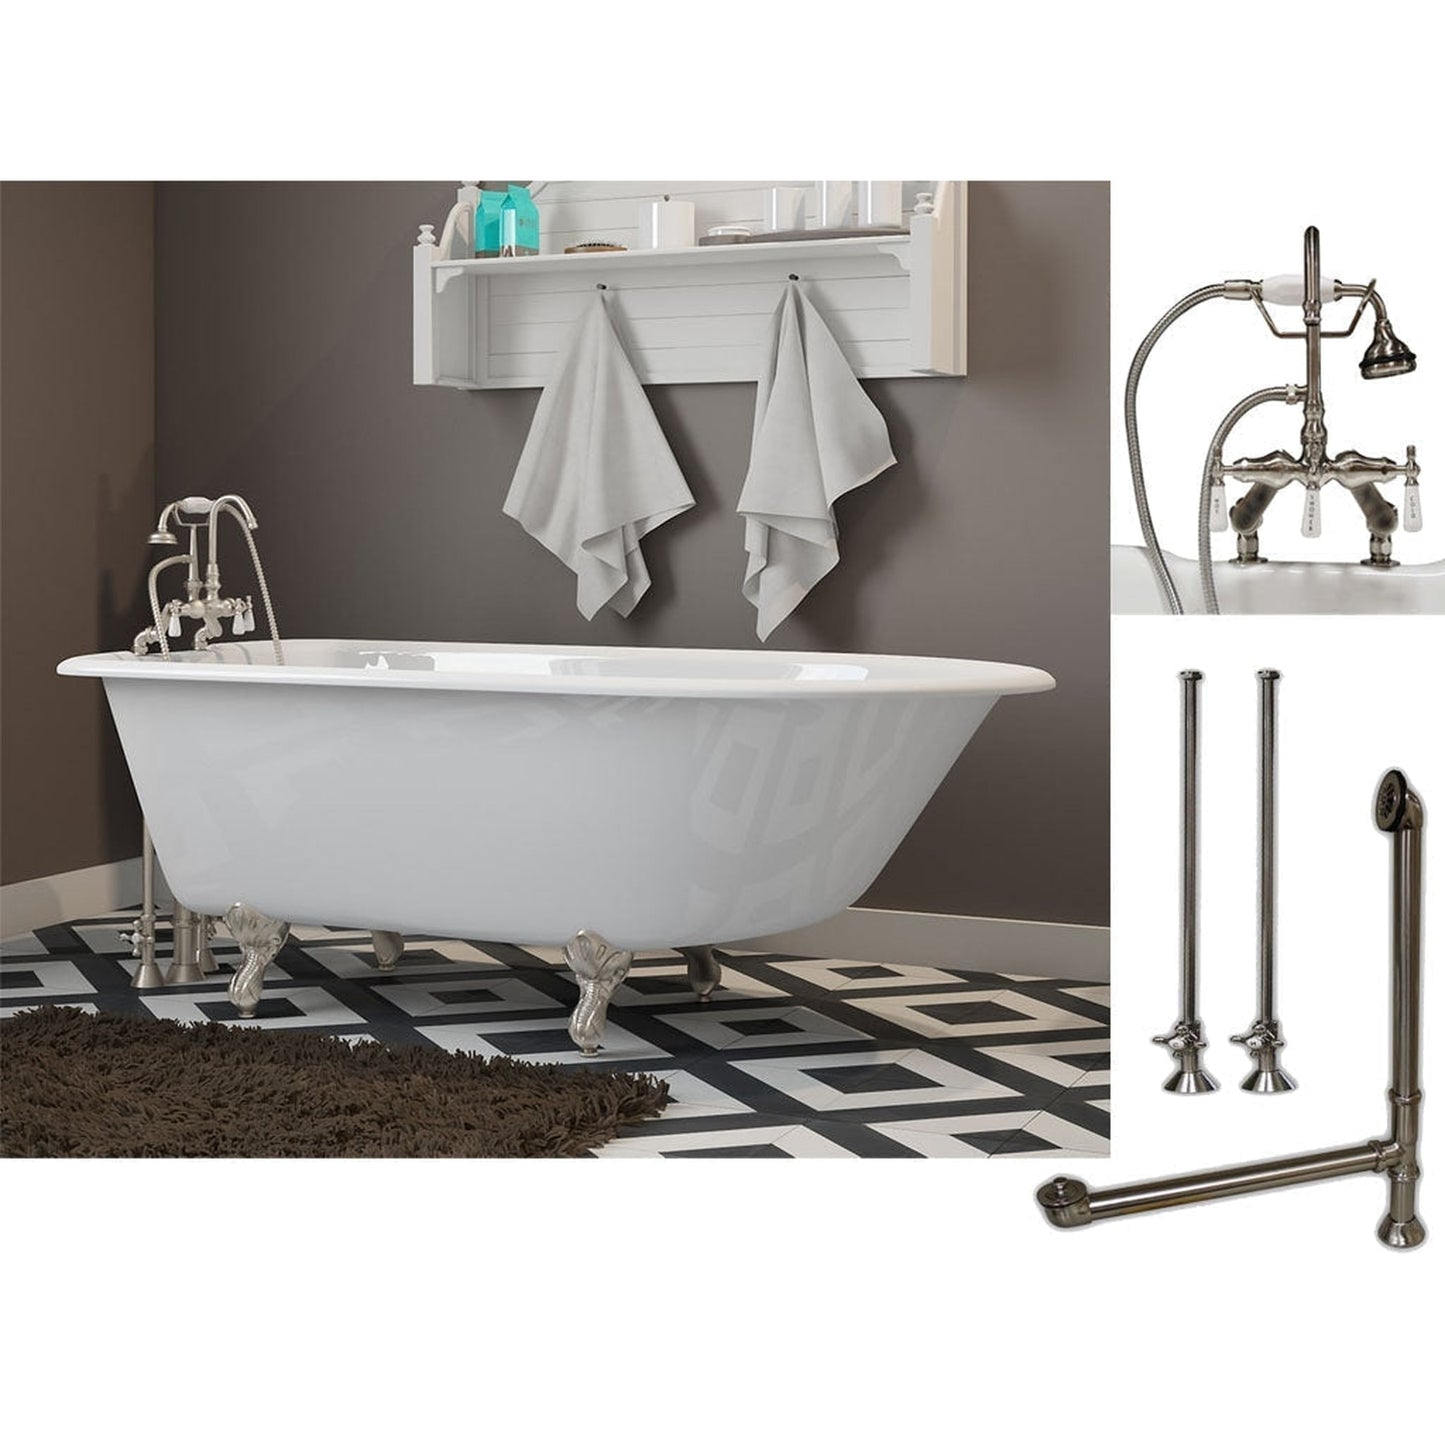 Cambridge Plumbing 54" White Cast Iron Rolled Rim Clawfoot Bathtub With Deck Holes And Complete Plumbing Package Including Porcelain Lever English Telephone Brass Faucet, Supply Lines, Drain And Overflow Assembly In Brushed Nickel